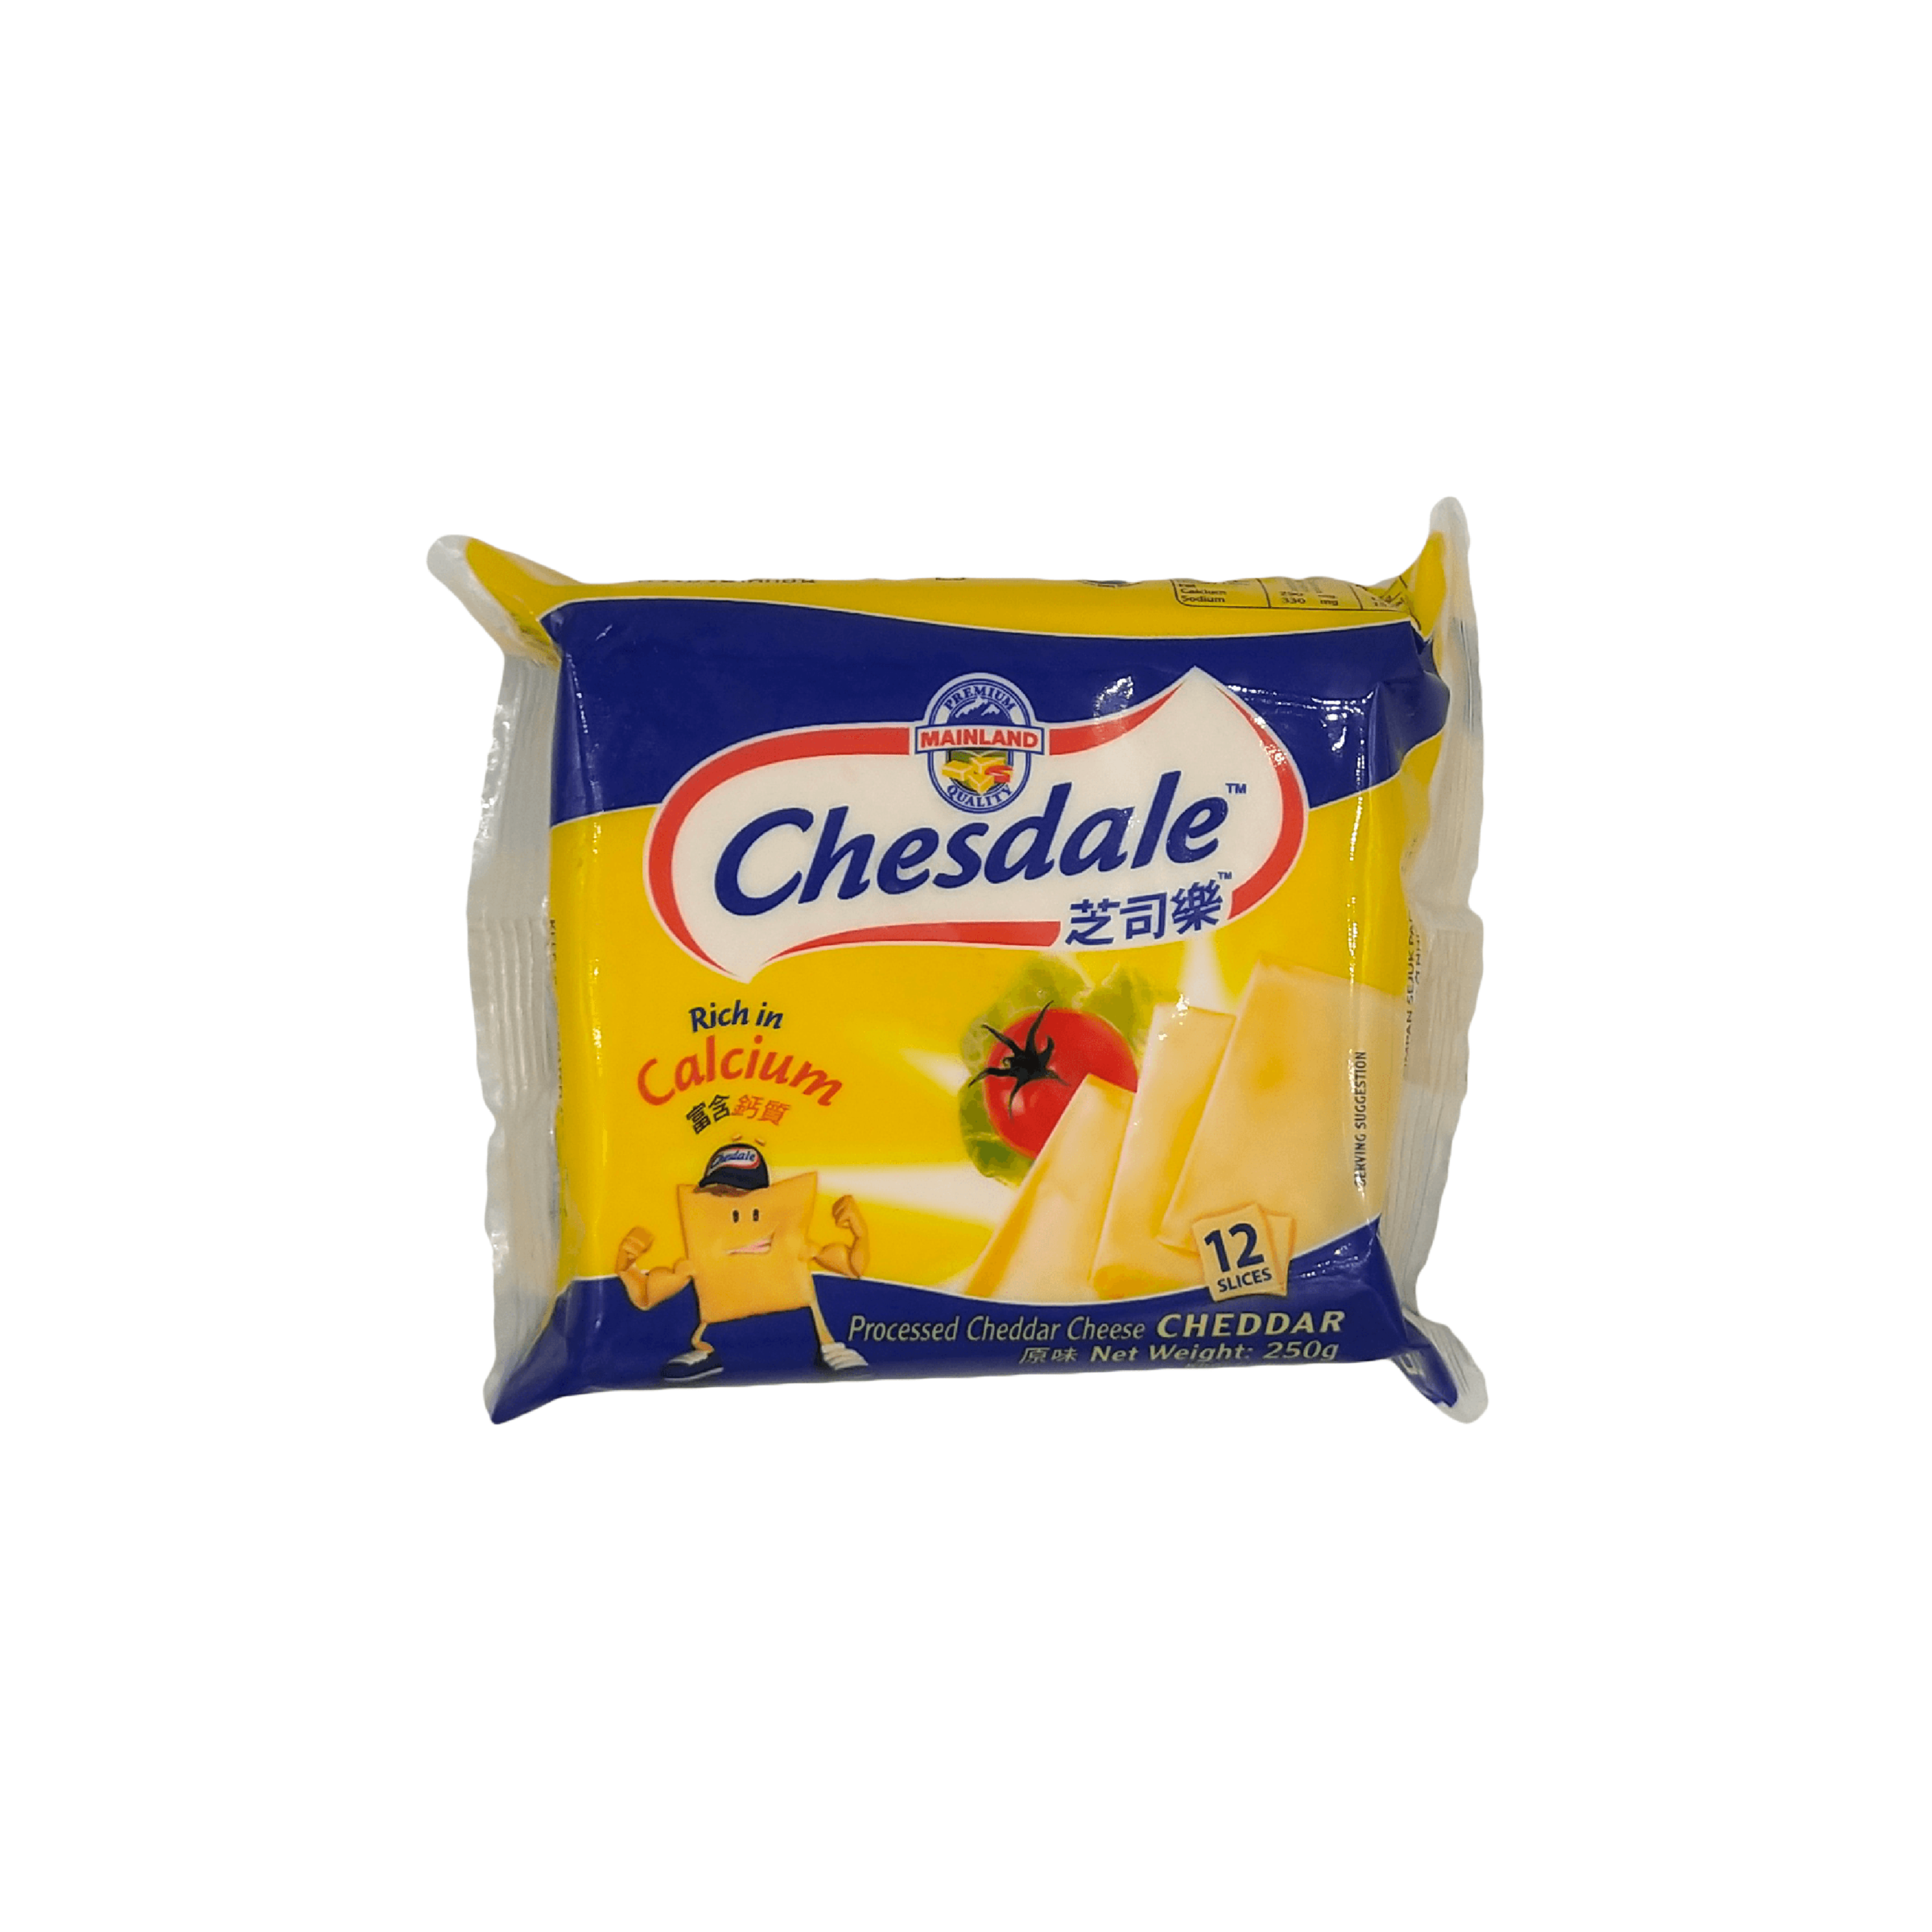 Chesdale Cheddar Cheese Slice 12s.png